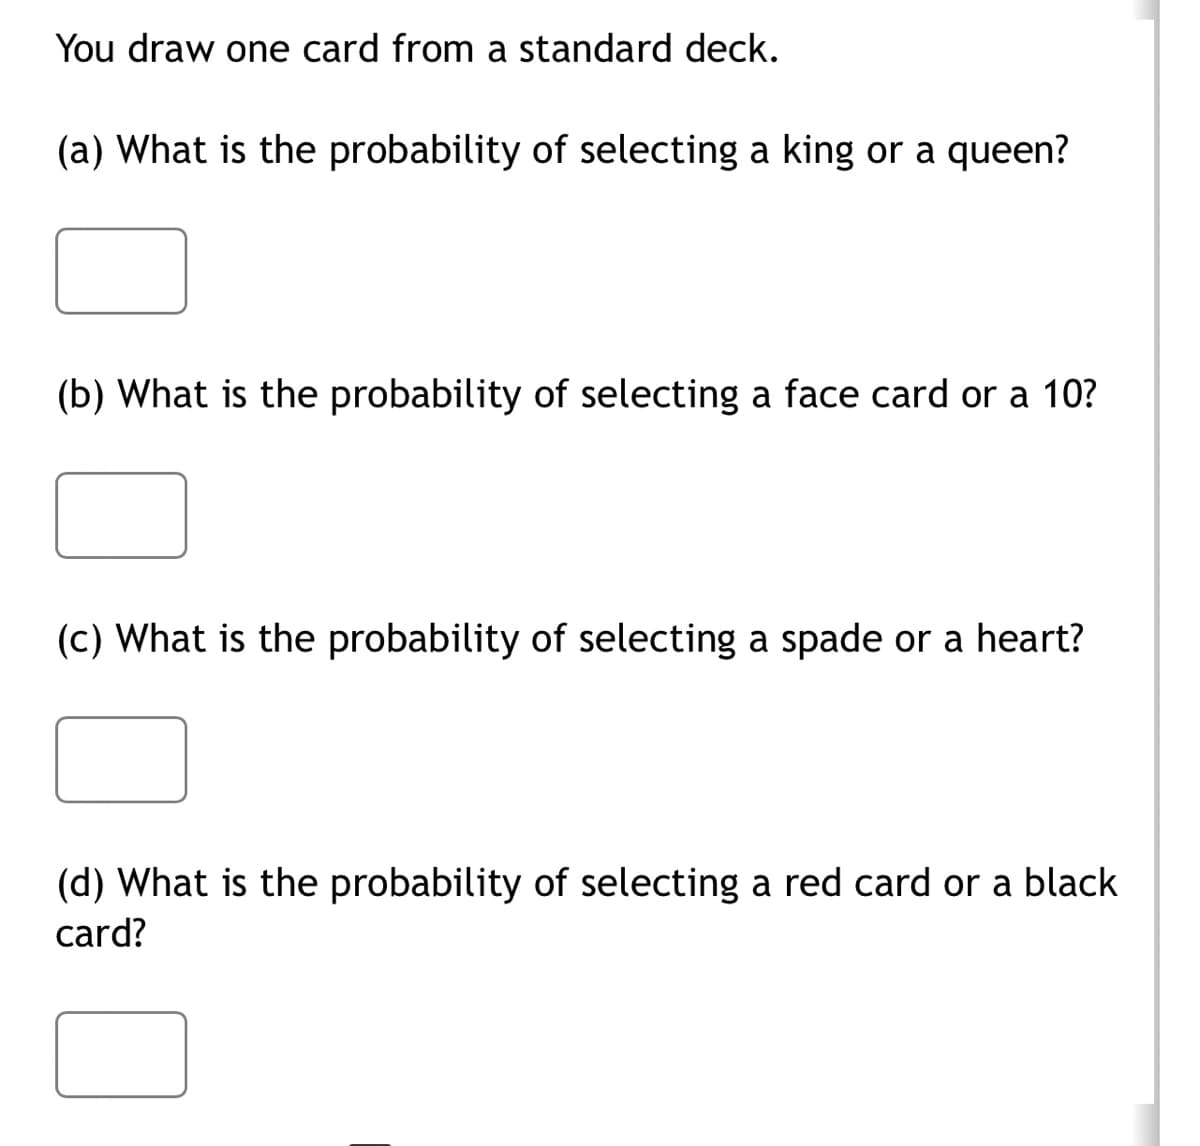 You draw one card from a standard deck.
(a) What is the probability of selecting a king or queen?
(b) What is the probability of selecting a face card or a 10?
(c) What is the probability of selecting a spade or a heart?
(d) What is the probability of selecting a red card or a black
card?